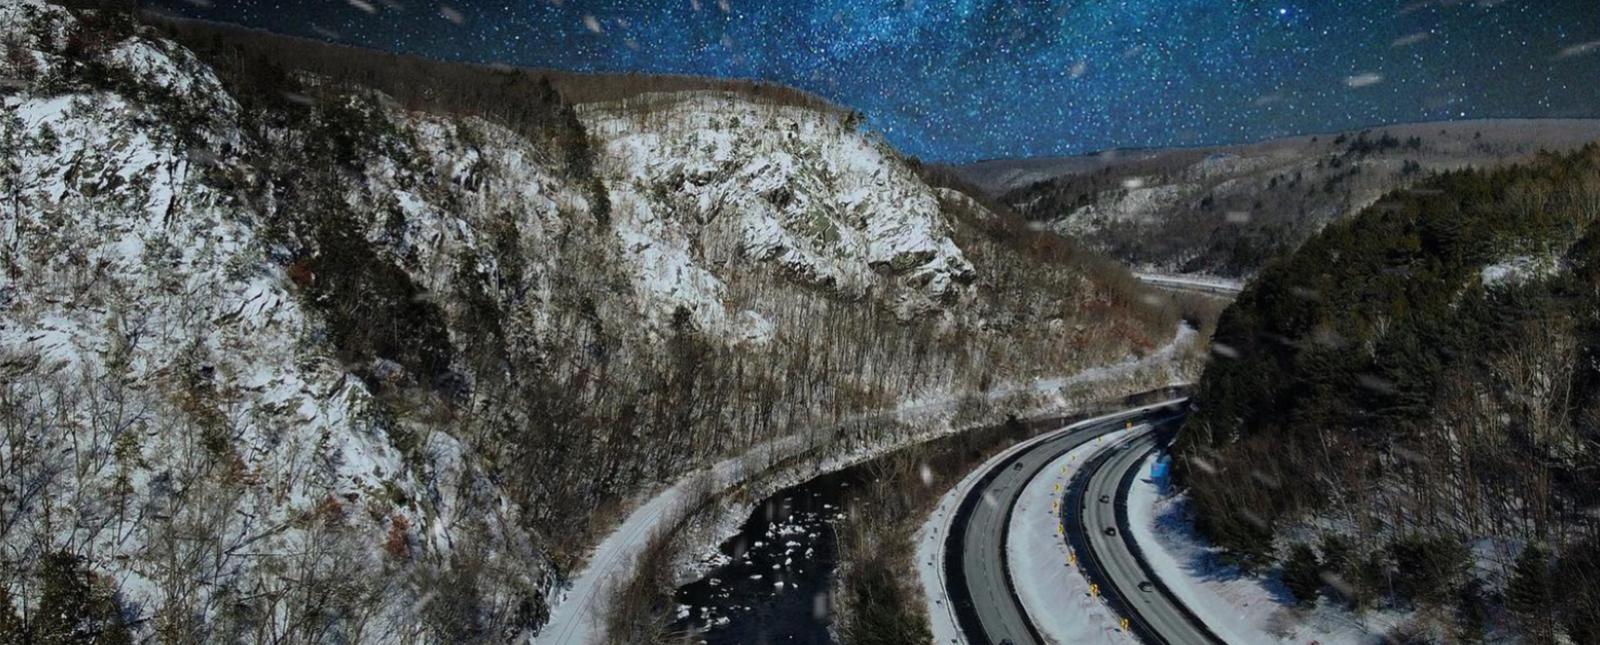 Highway going through snowy mountains at night (Instagram@dronesoverthevalley)